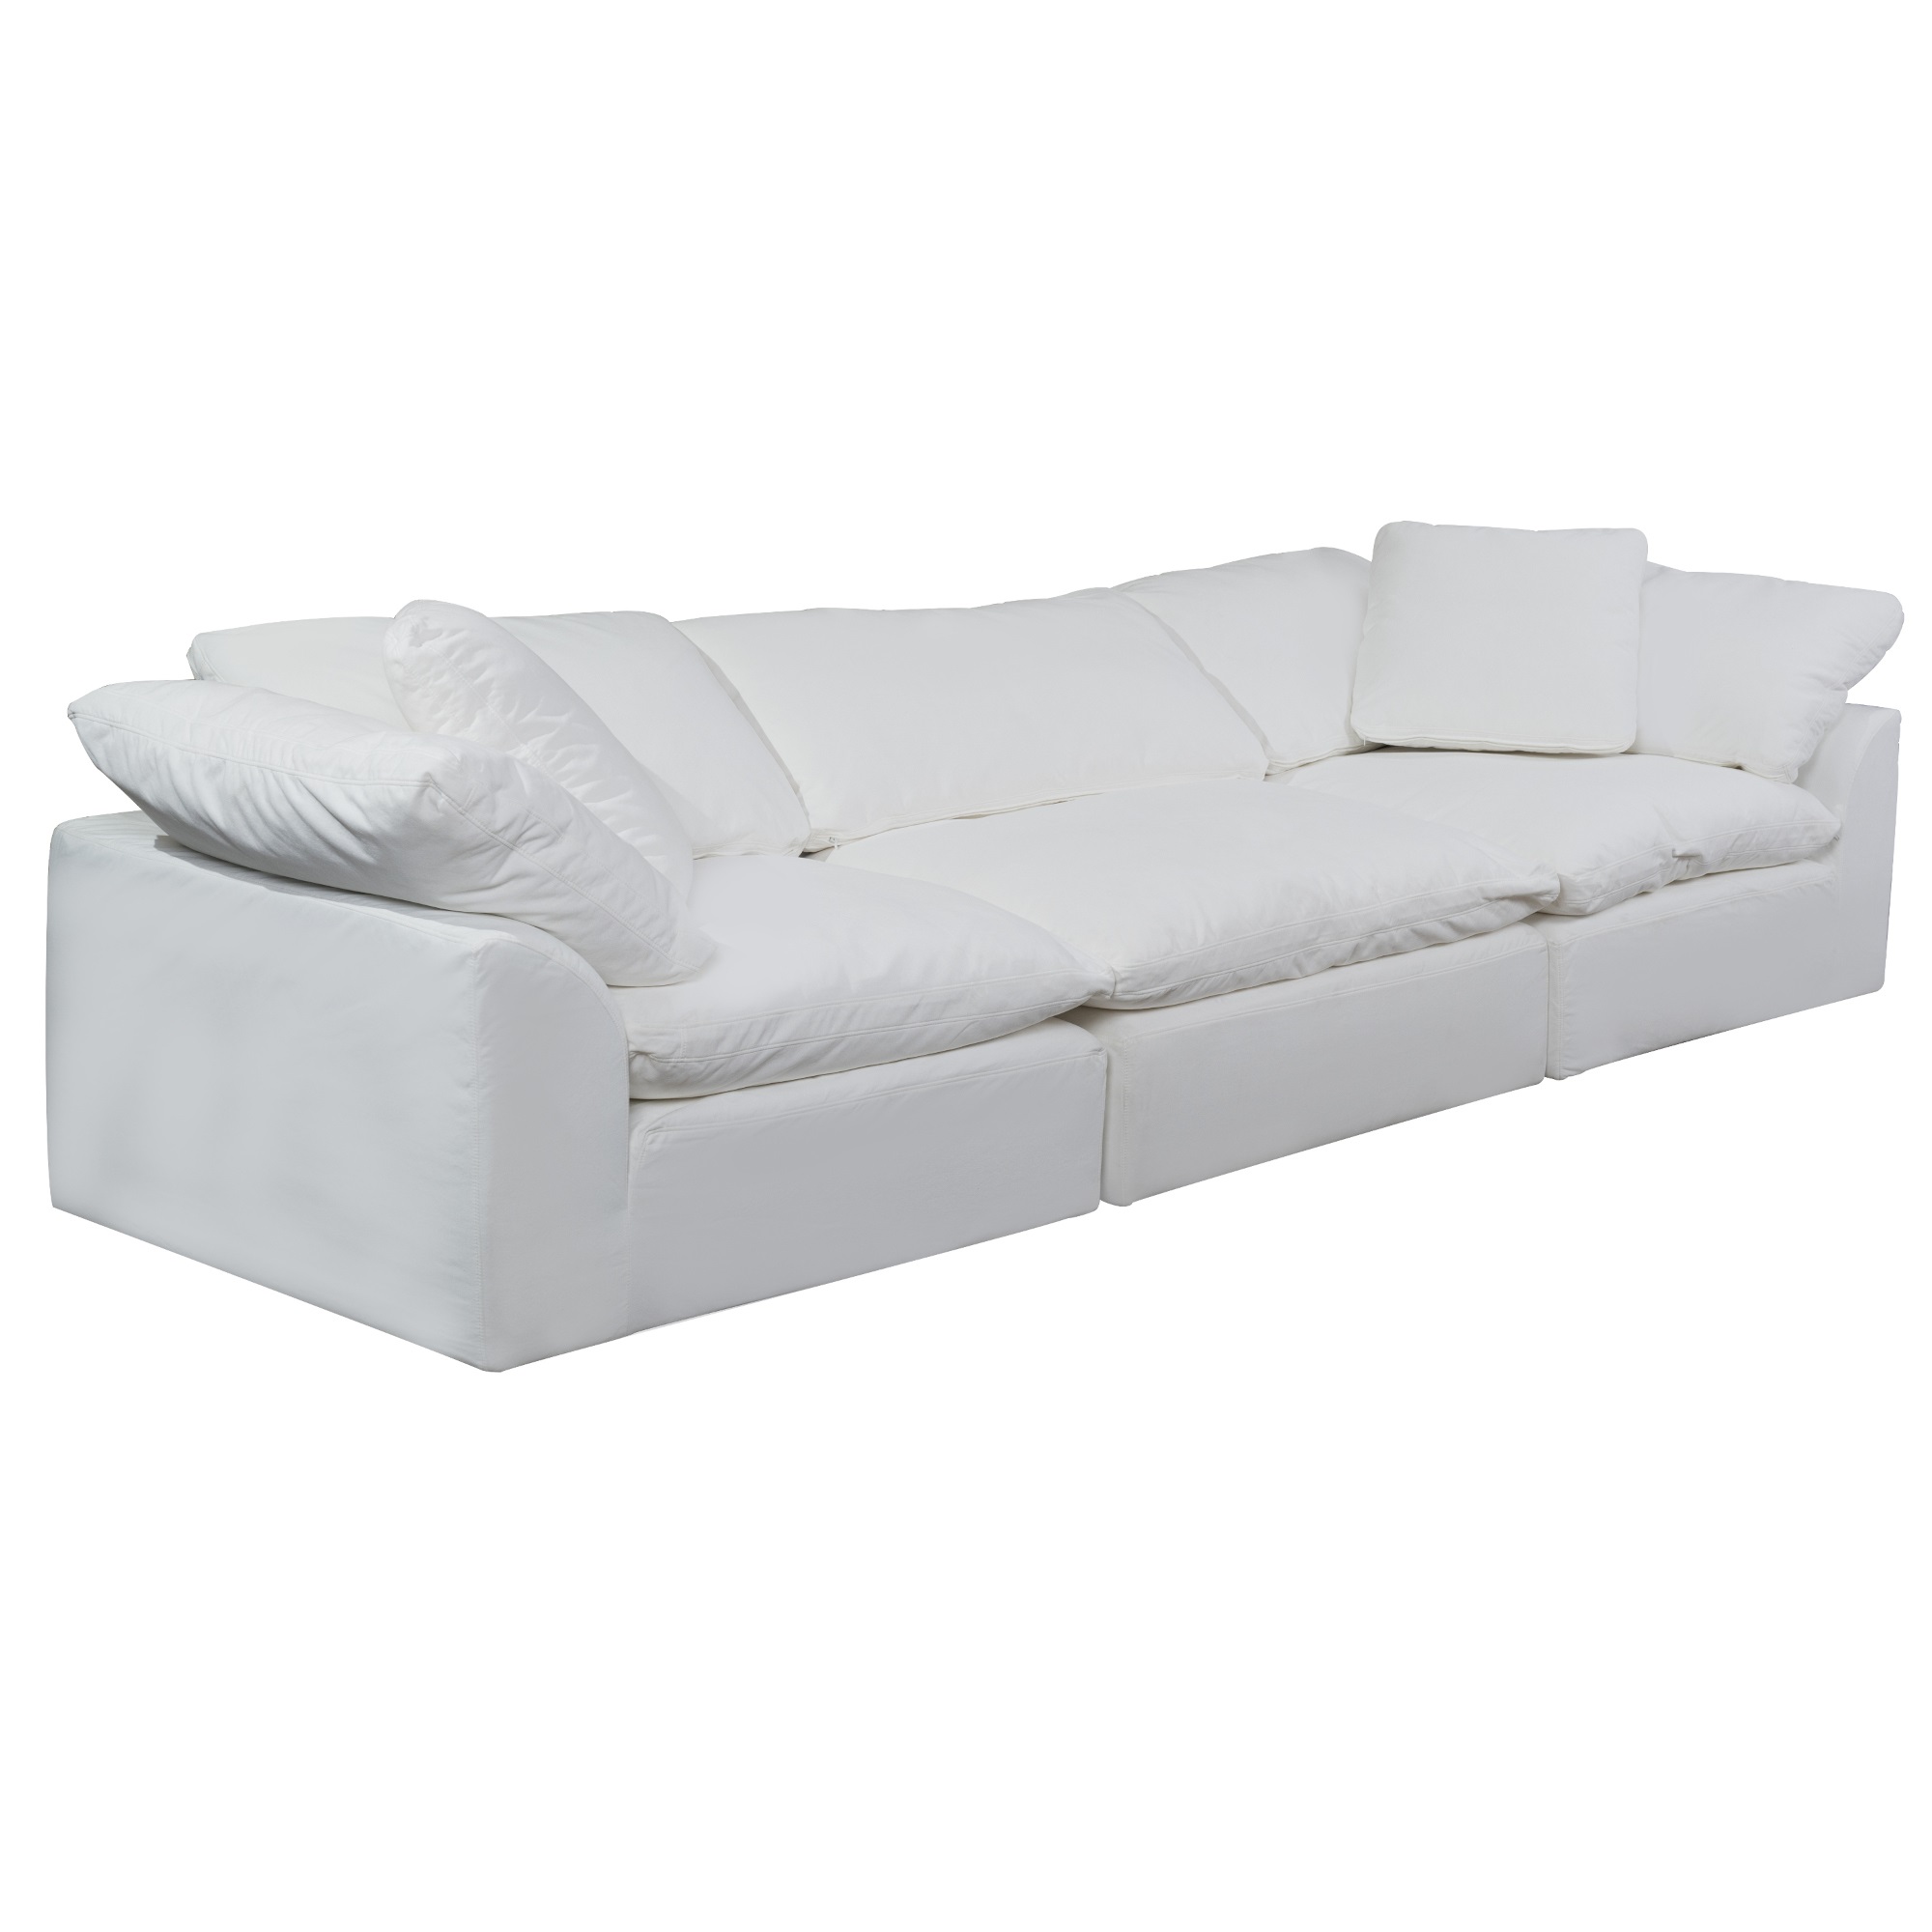 Sunset Trading Puff Collection Slipcover Only for 3PC 132" Sectional Sofa,Modular Couch Fitted Slip Covers, White